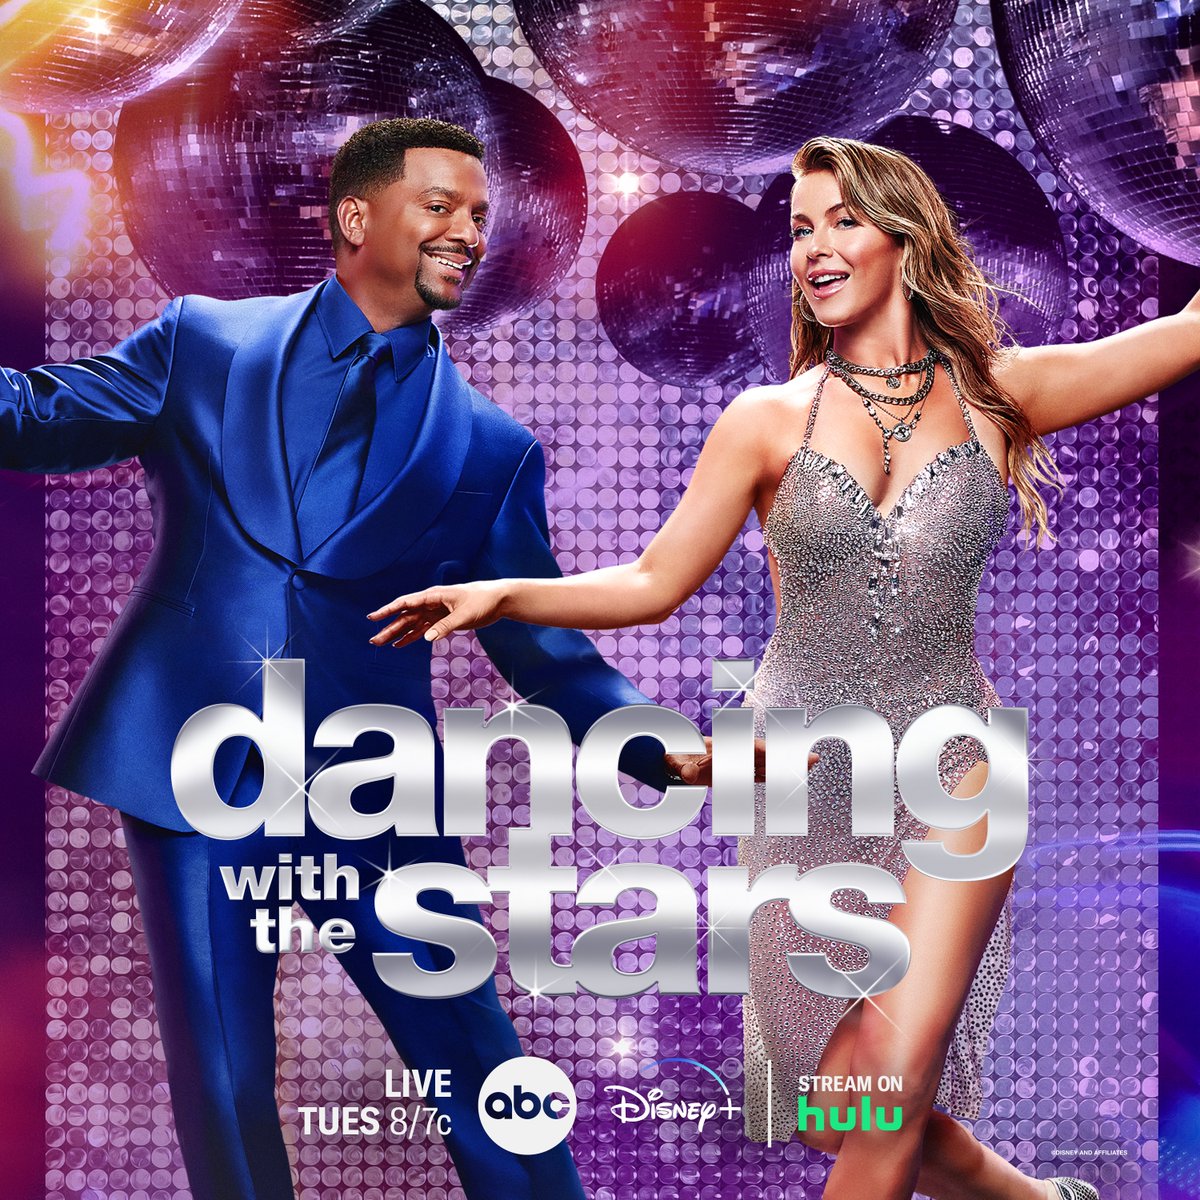 #DWTS honors the legacy and music of Whitney Houston with guest judge Billy Porter! 💜 Don’t miss #WhitneyHoustonNight, streaming live tonight at 8/7c on #DisneyPlus.